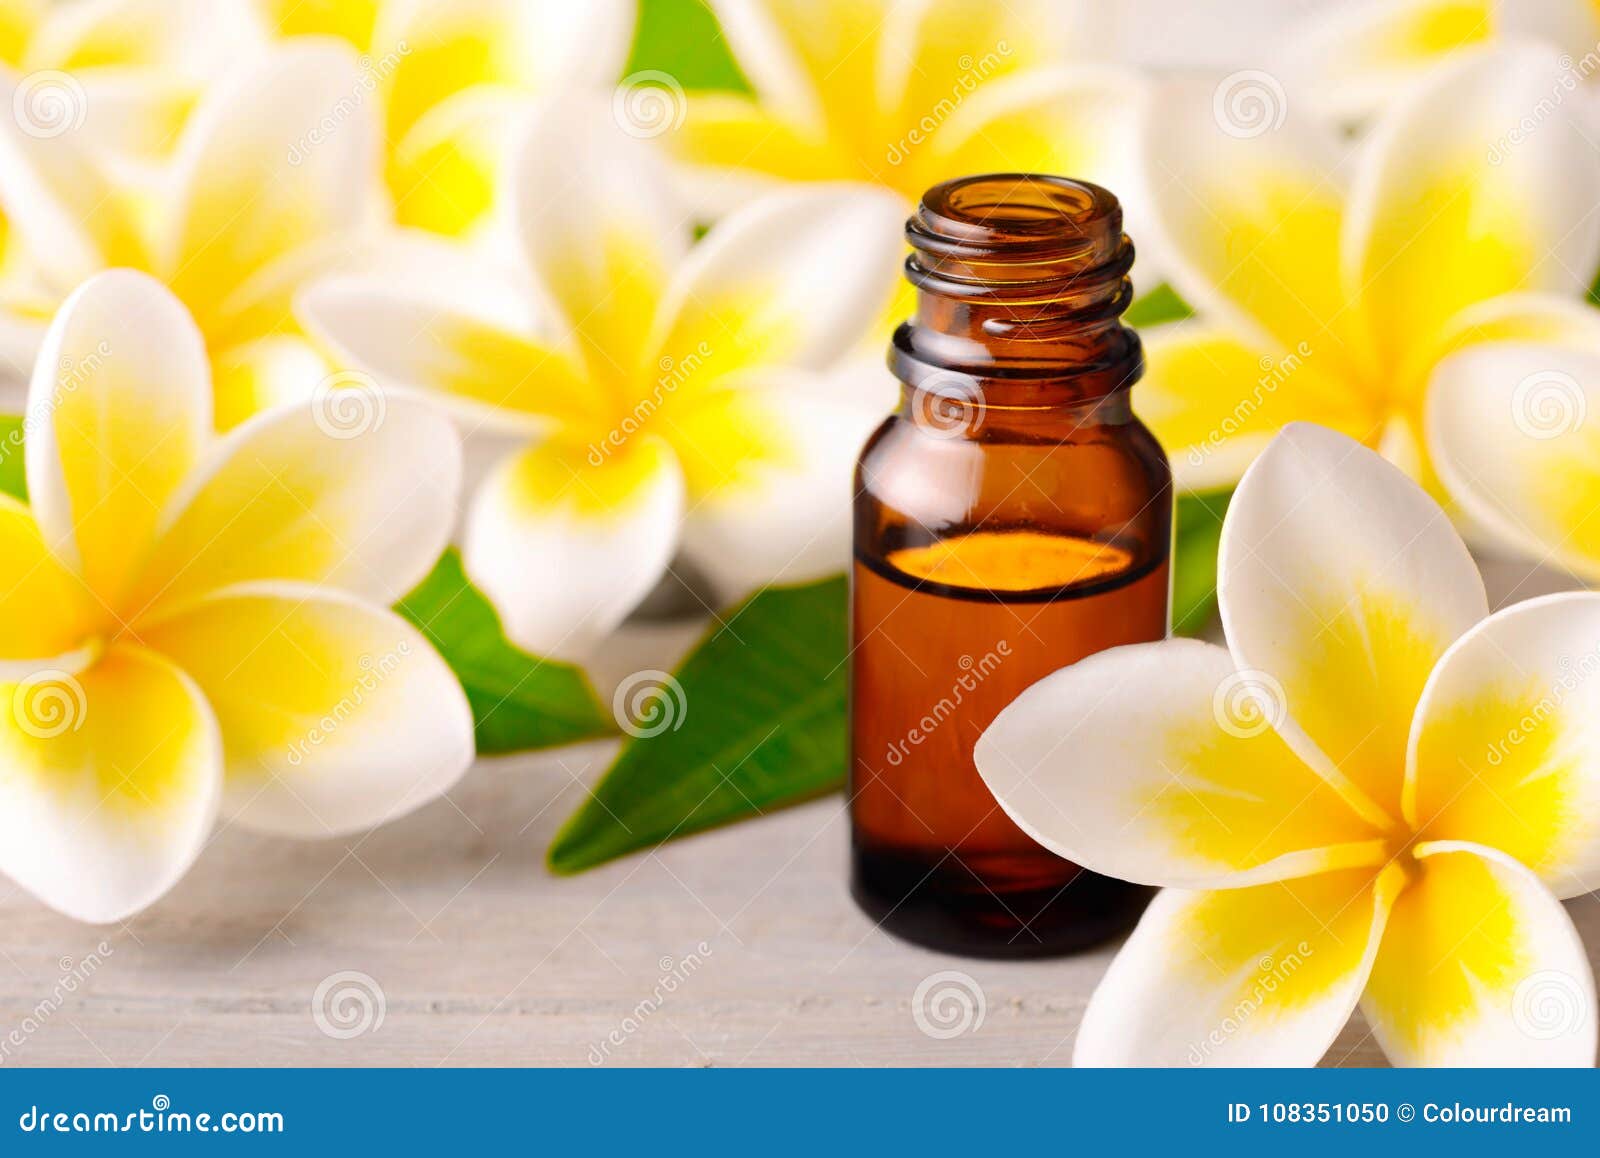 Plumeria Essential Oil Perfume and Yellow Plumeria Flowers on the Wooden  Table Stock Photo - Image of herb, plank: 108351050